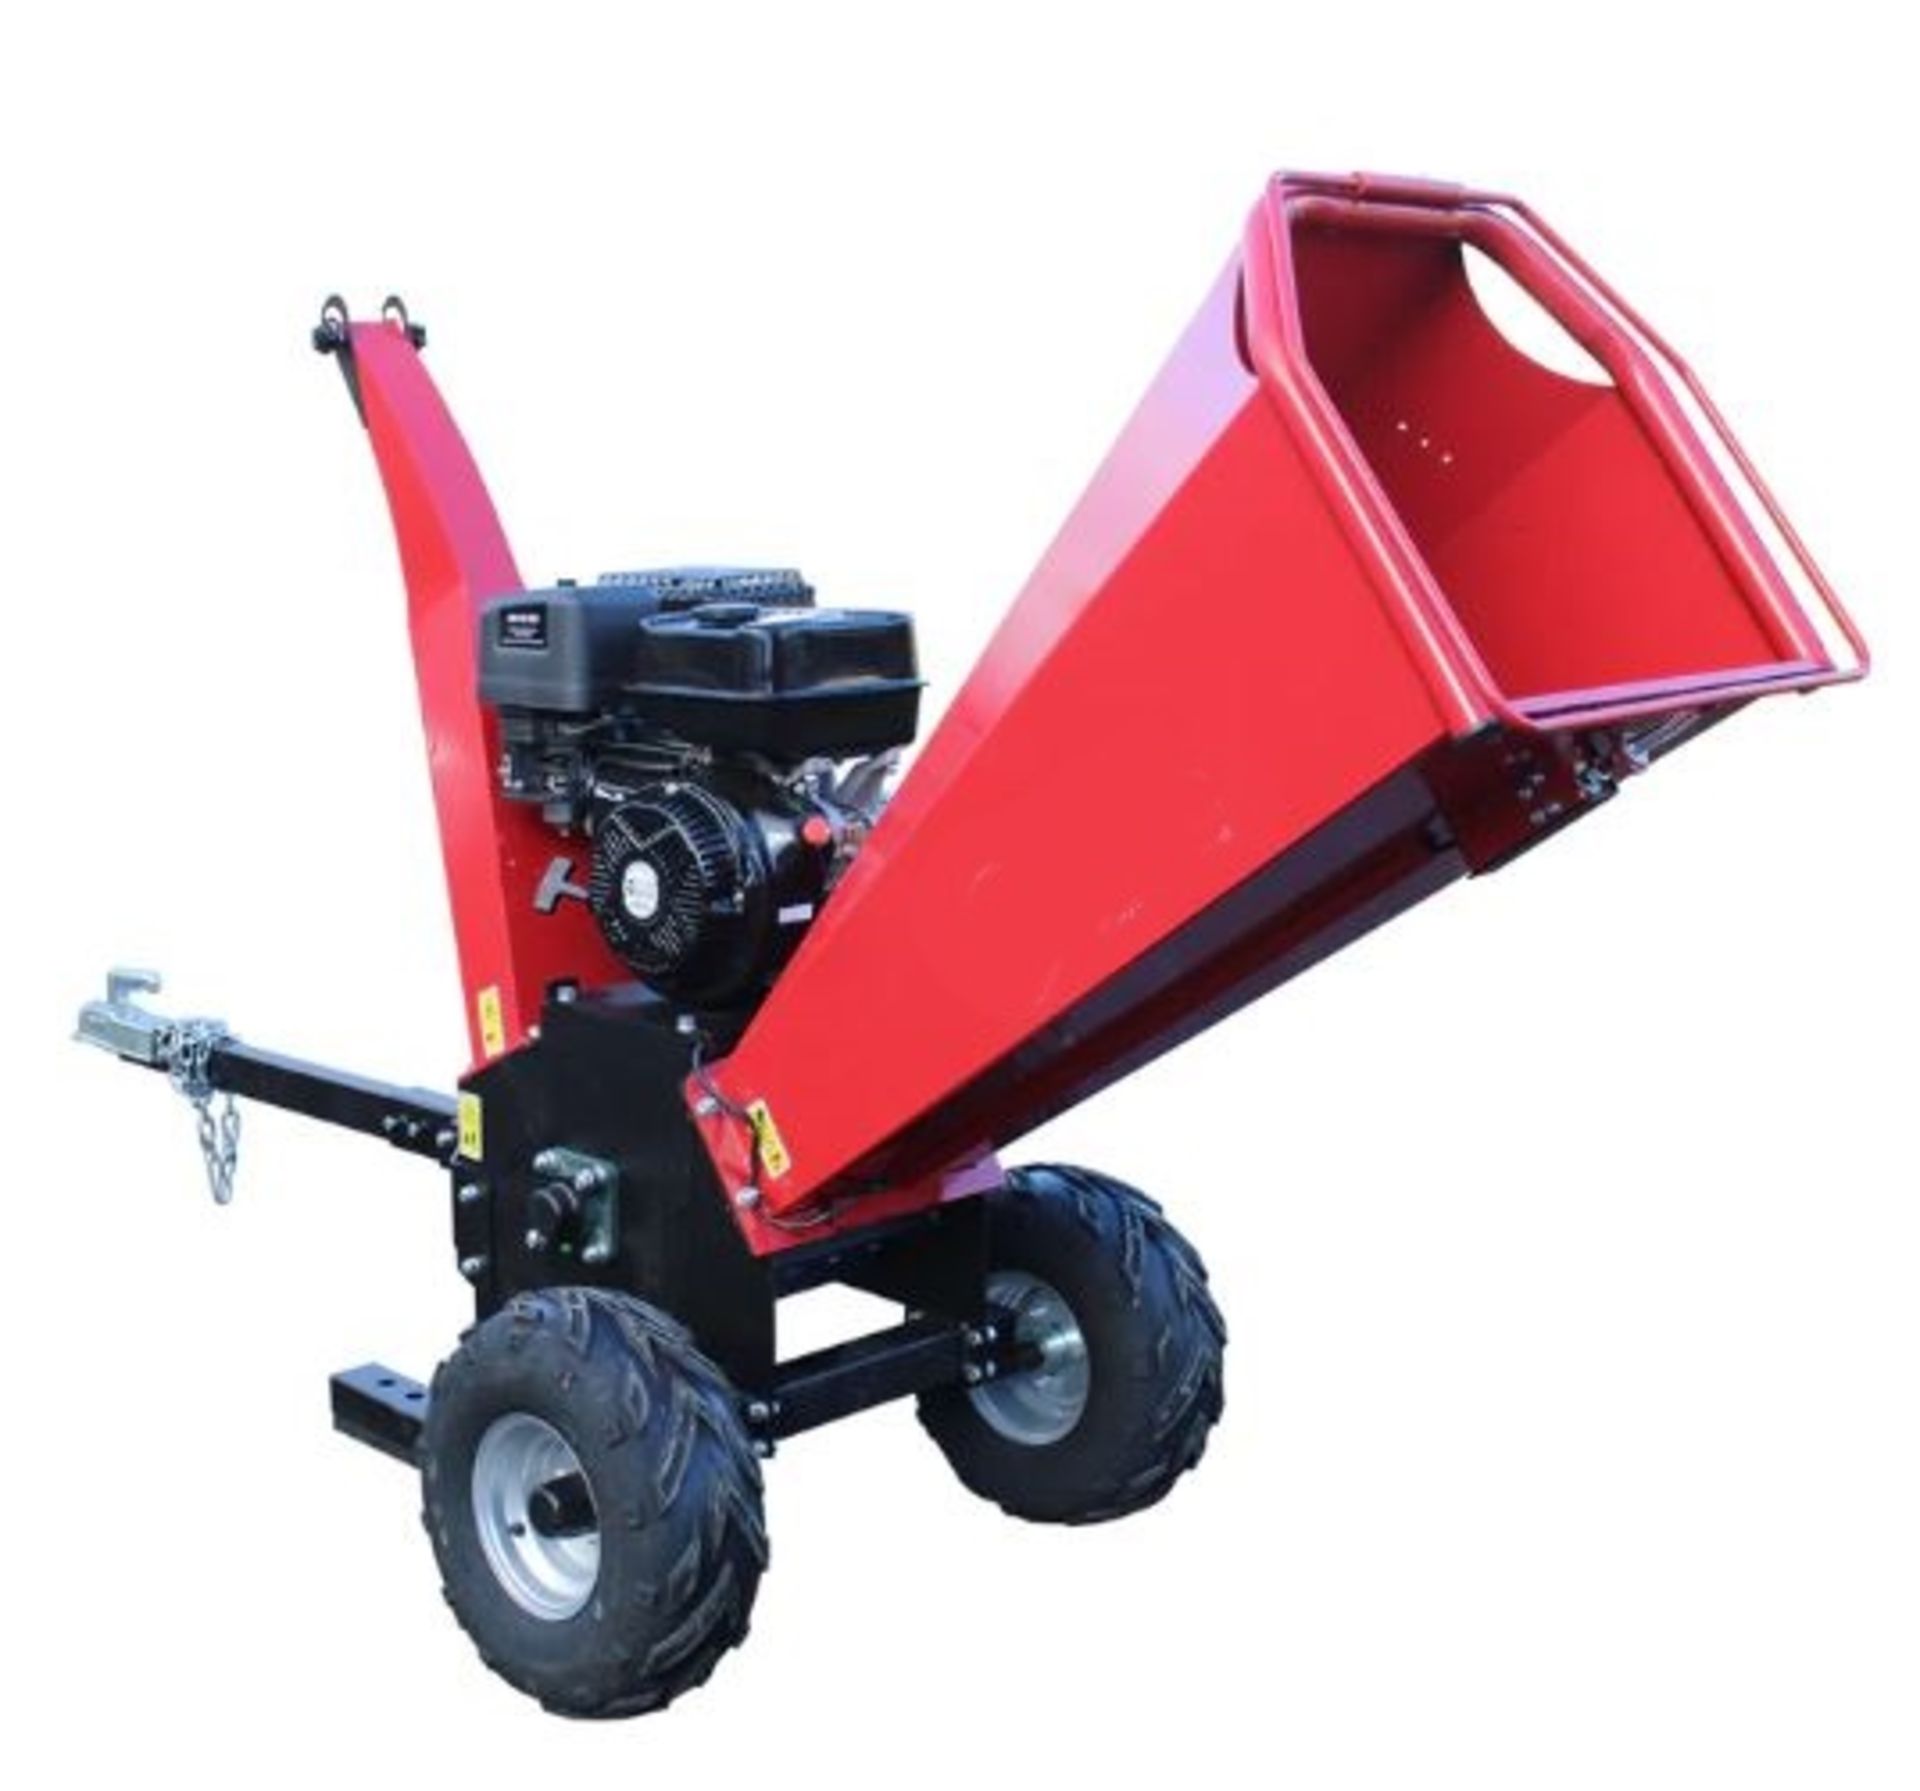 420cc Wood Chipper - BRAND NEW, comes with LED Rear light pack and numberplate holder *PLUS VAT* - Image 5 of 10